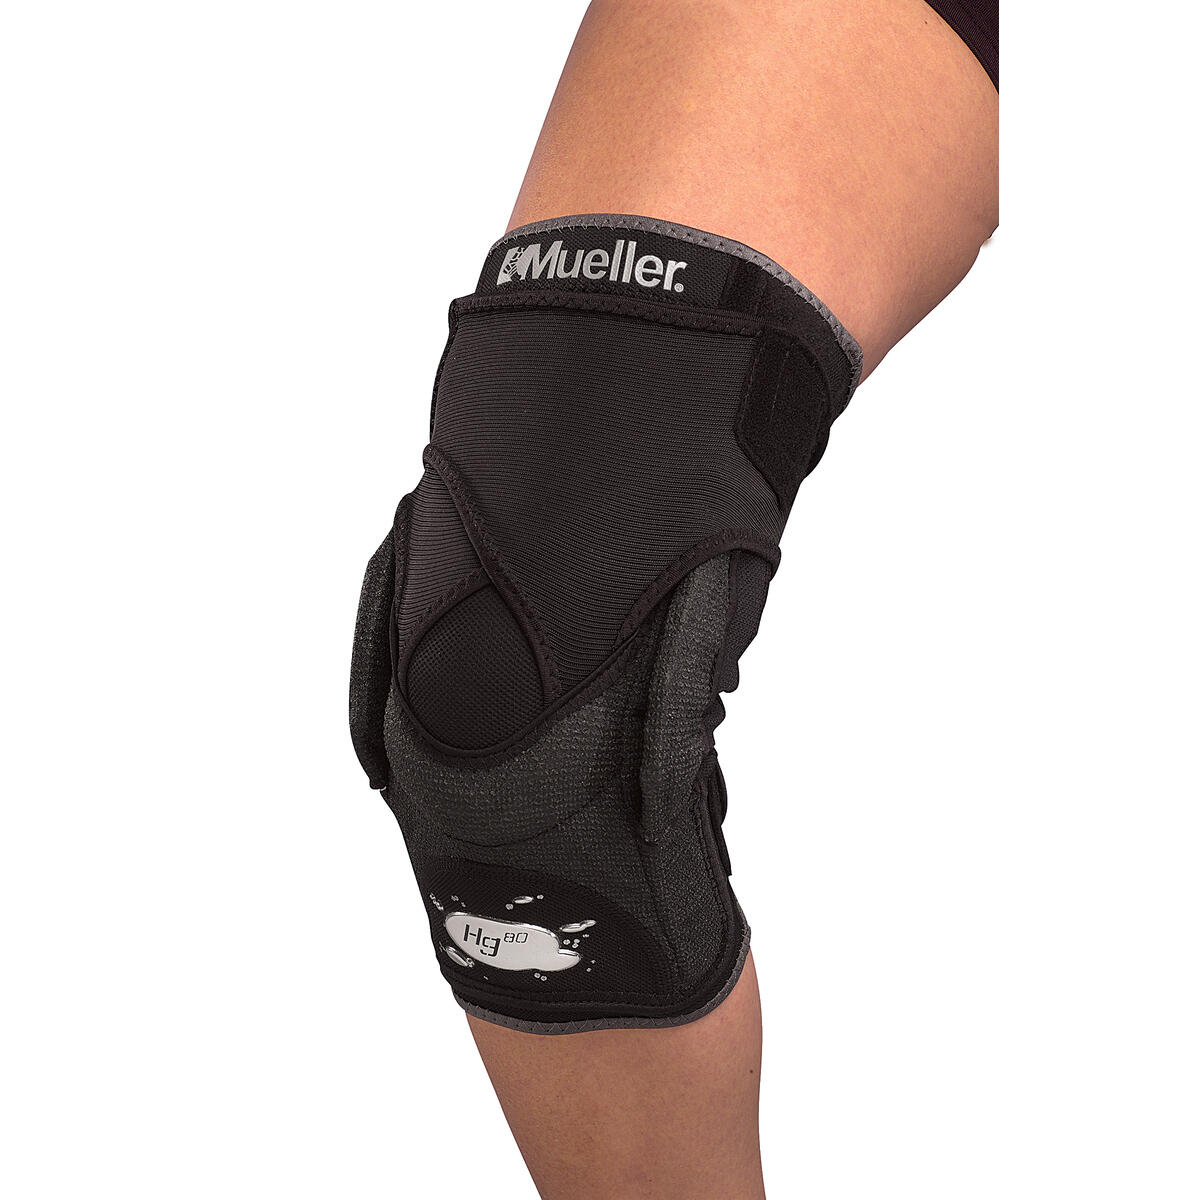 Mueller HG80 Hinged Knee Brace with Kevlar Compression Support (XL) 2/2